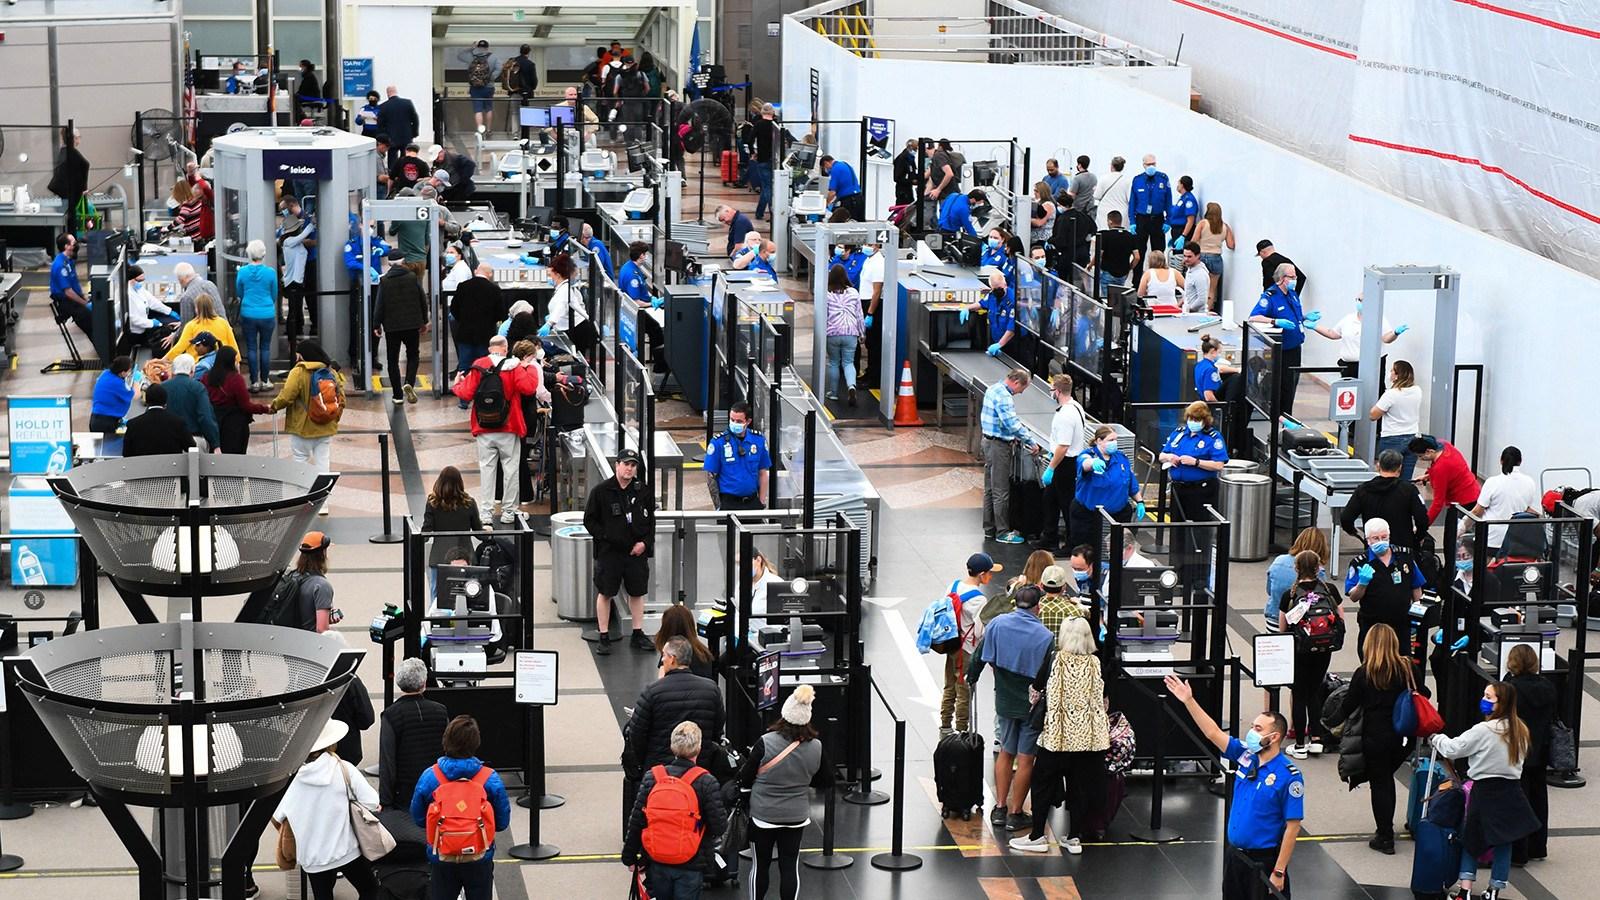 Airline passengers here wait at a Transportation Security Administration (TSA) checkpoint to clear security before boarding flights in Denver, Colorado on April 19. (Patrick T. Fallon / AFP / Getty Images via CNN)